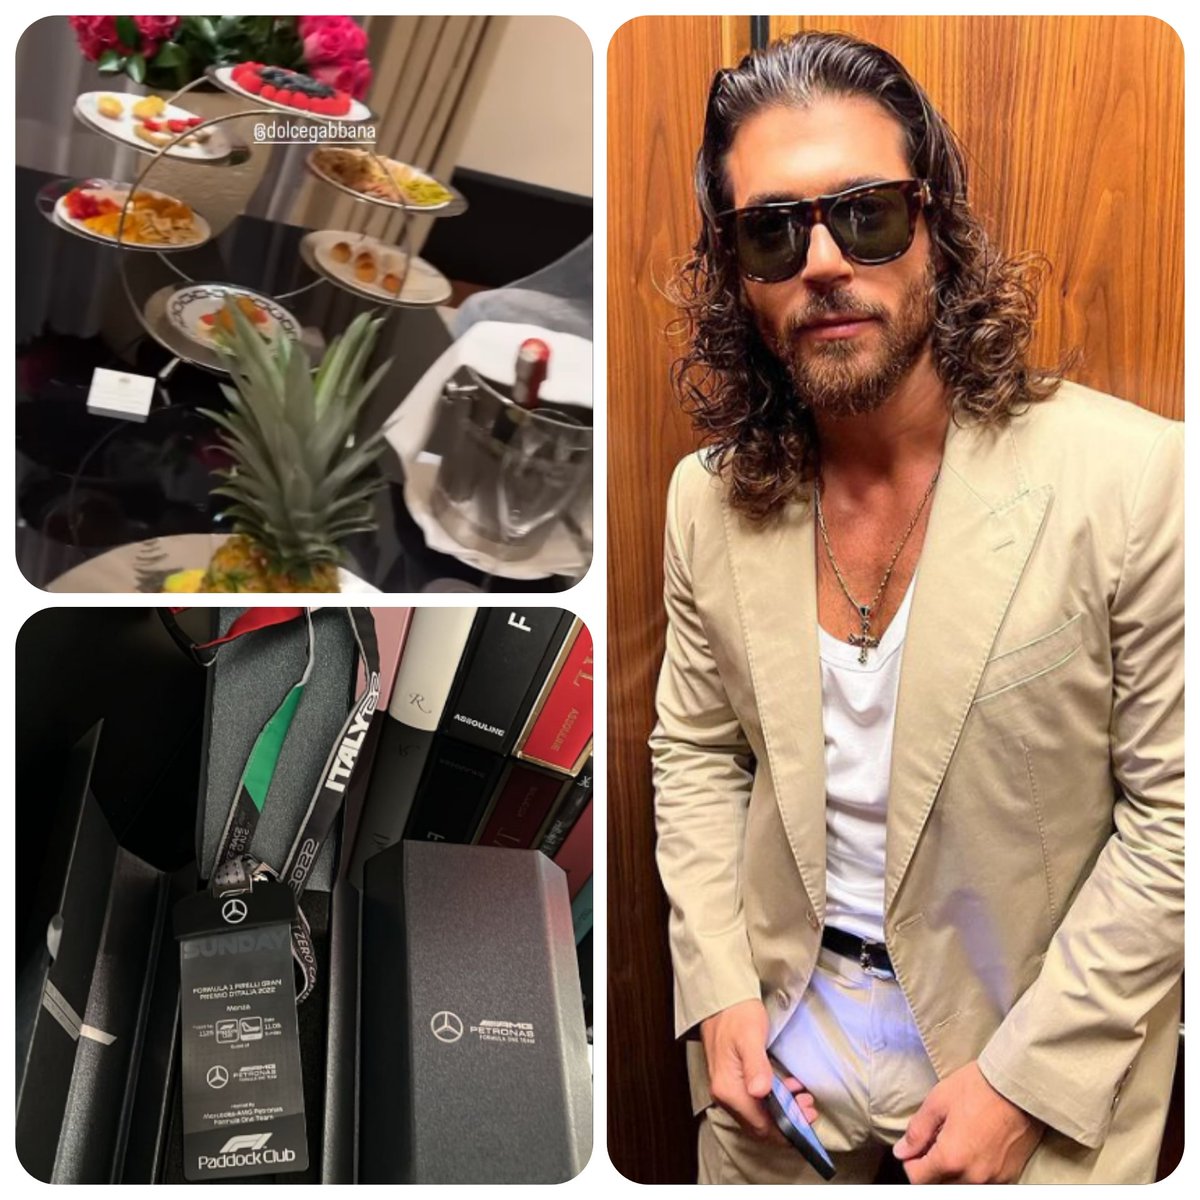 Wow! I envy #CanYaman the roar of the engines & the balance of the Mercedes , to see live the Italian Grand Prix at the Monza circuit !Beautiful welcome to #MadarinOrientalHotel #Milano #ItalianGrandPrix22 & again the outfit of #DolceGabbana !💙💫
She is totally TOTALLOOK